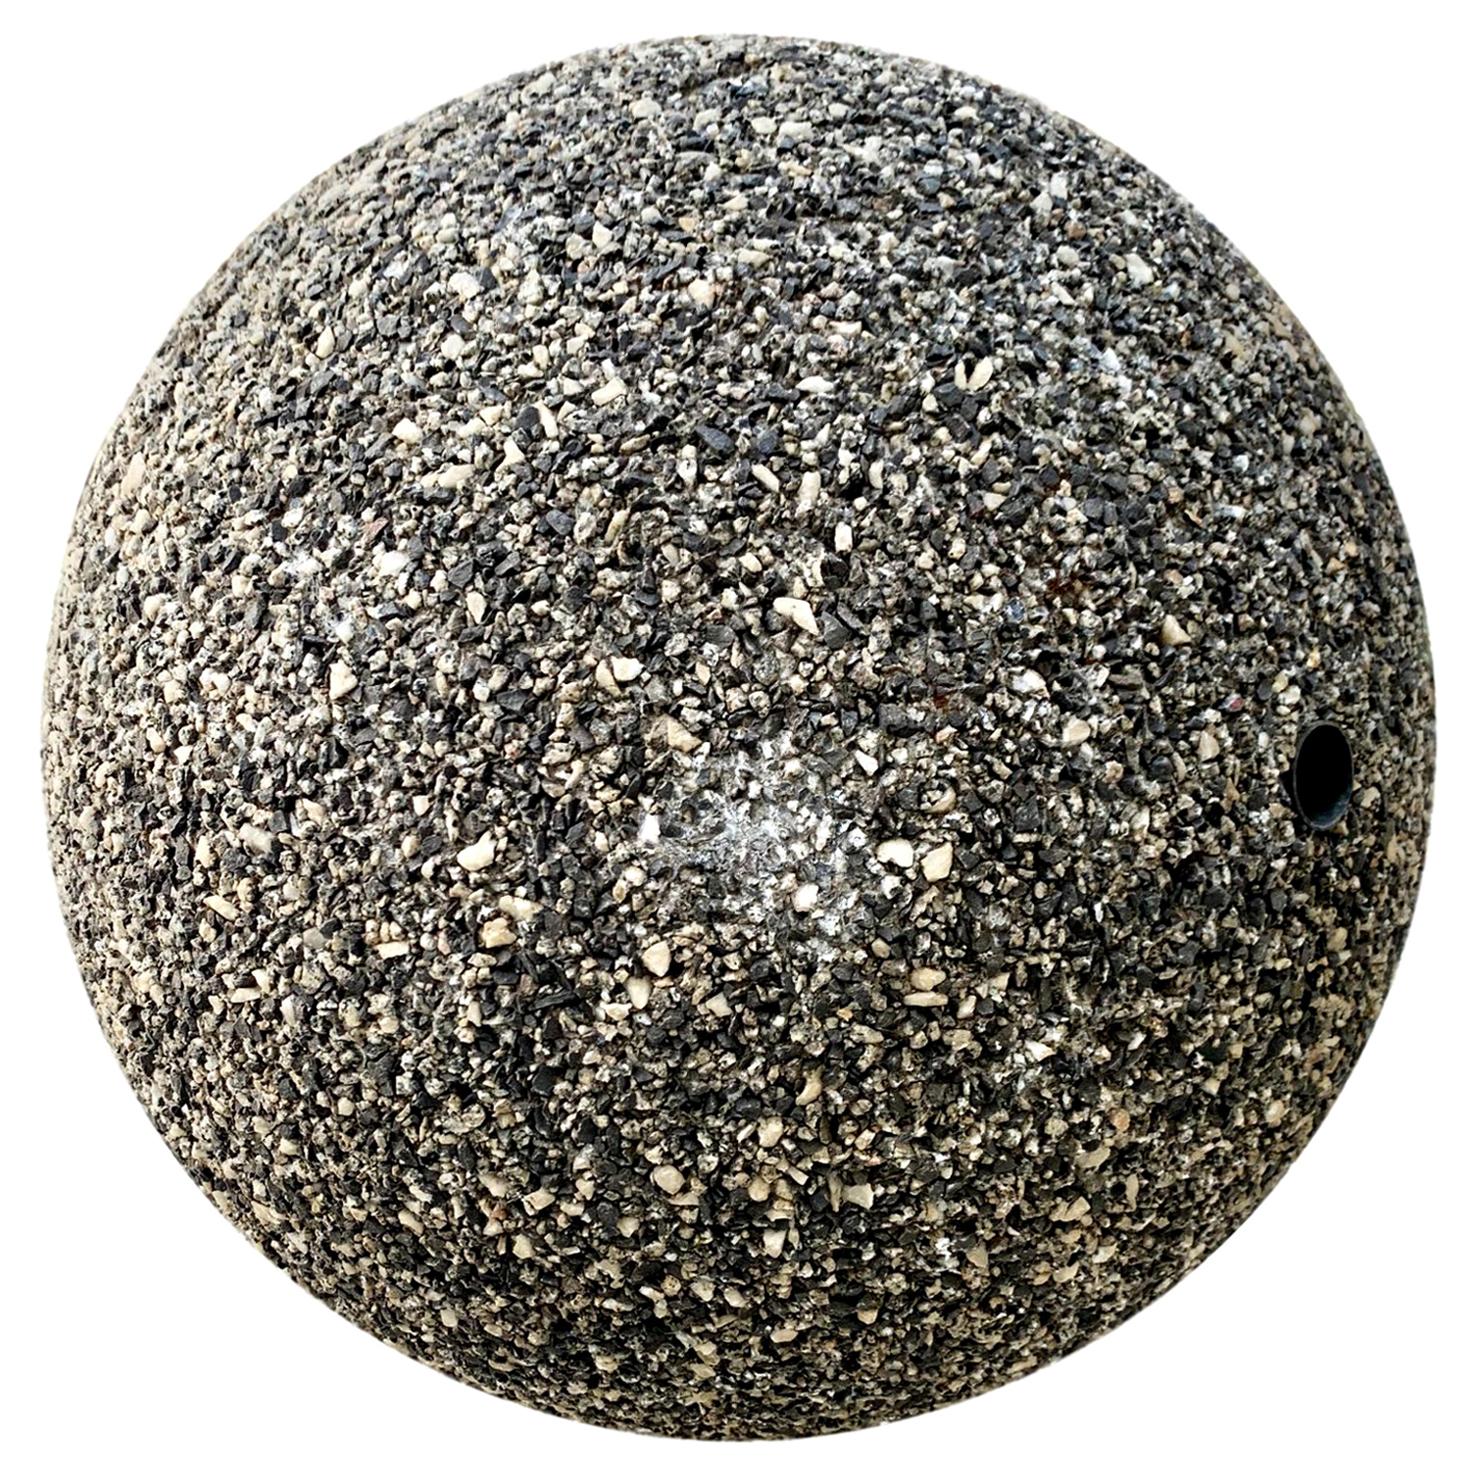 Giant Concrete and Stone Water Fountain Ball